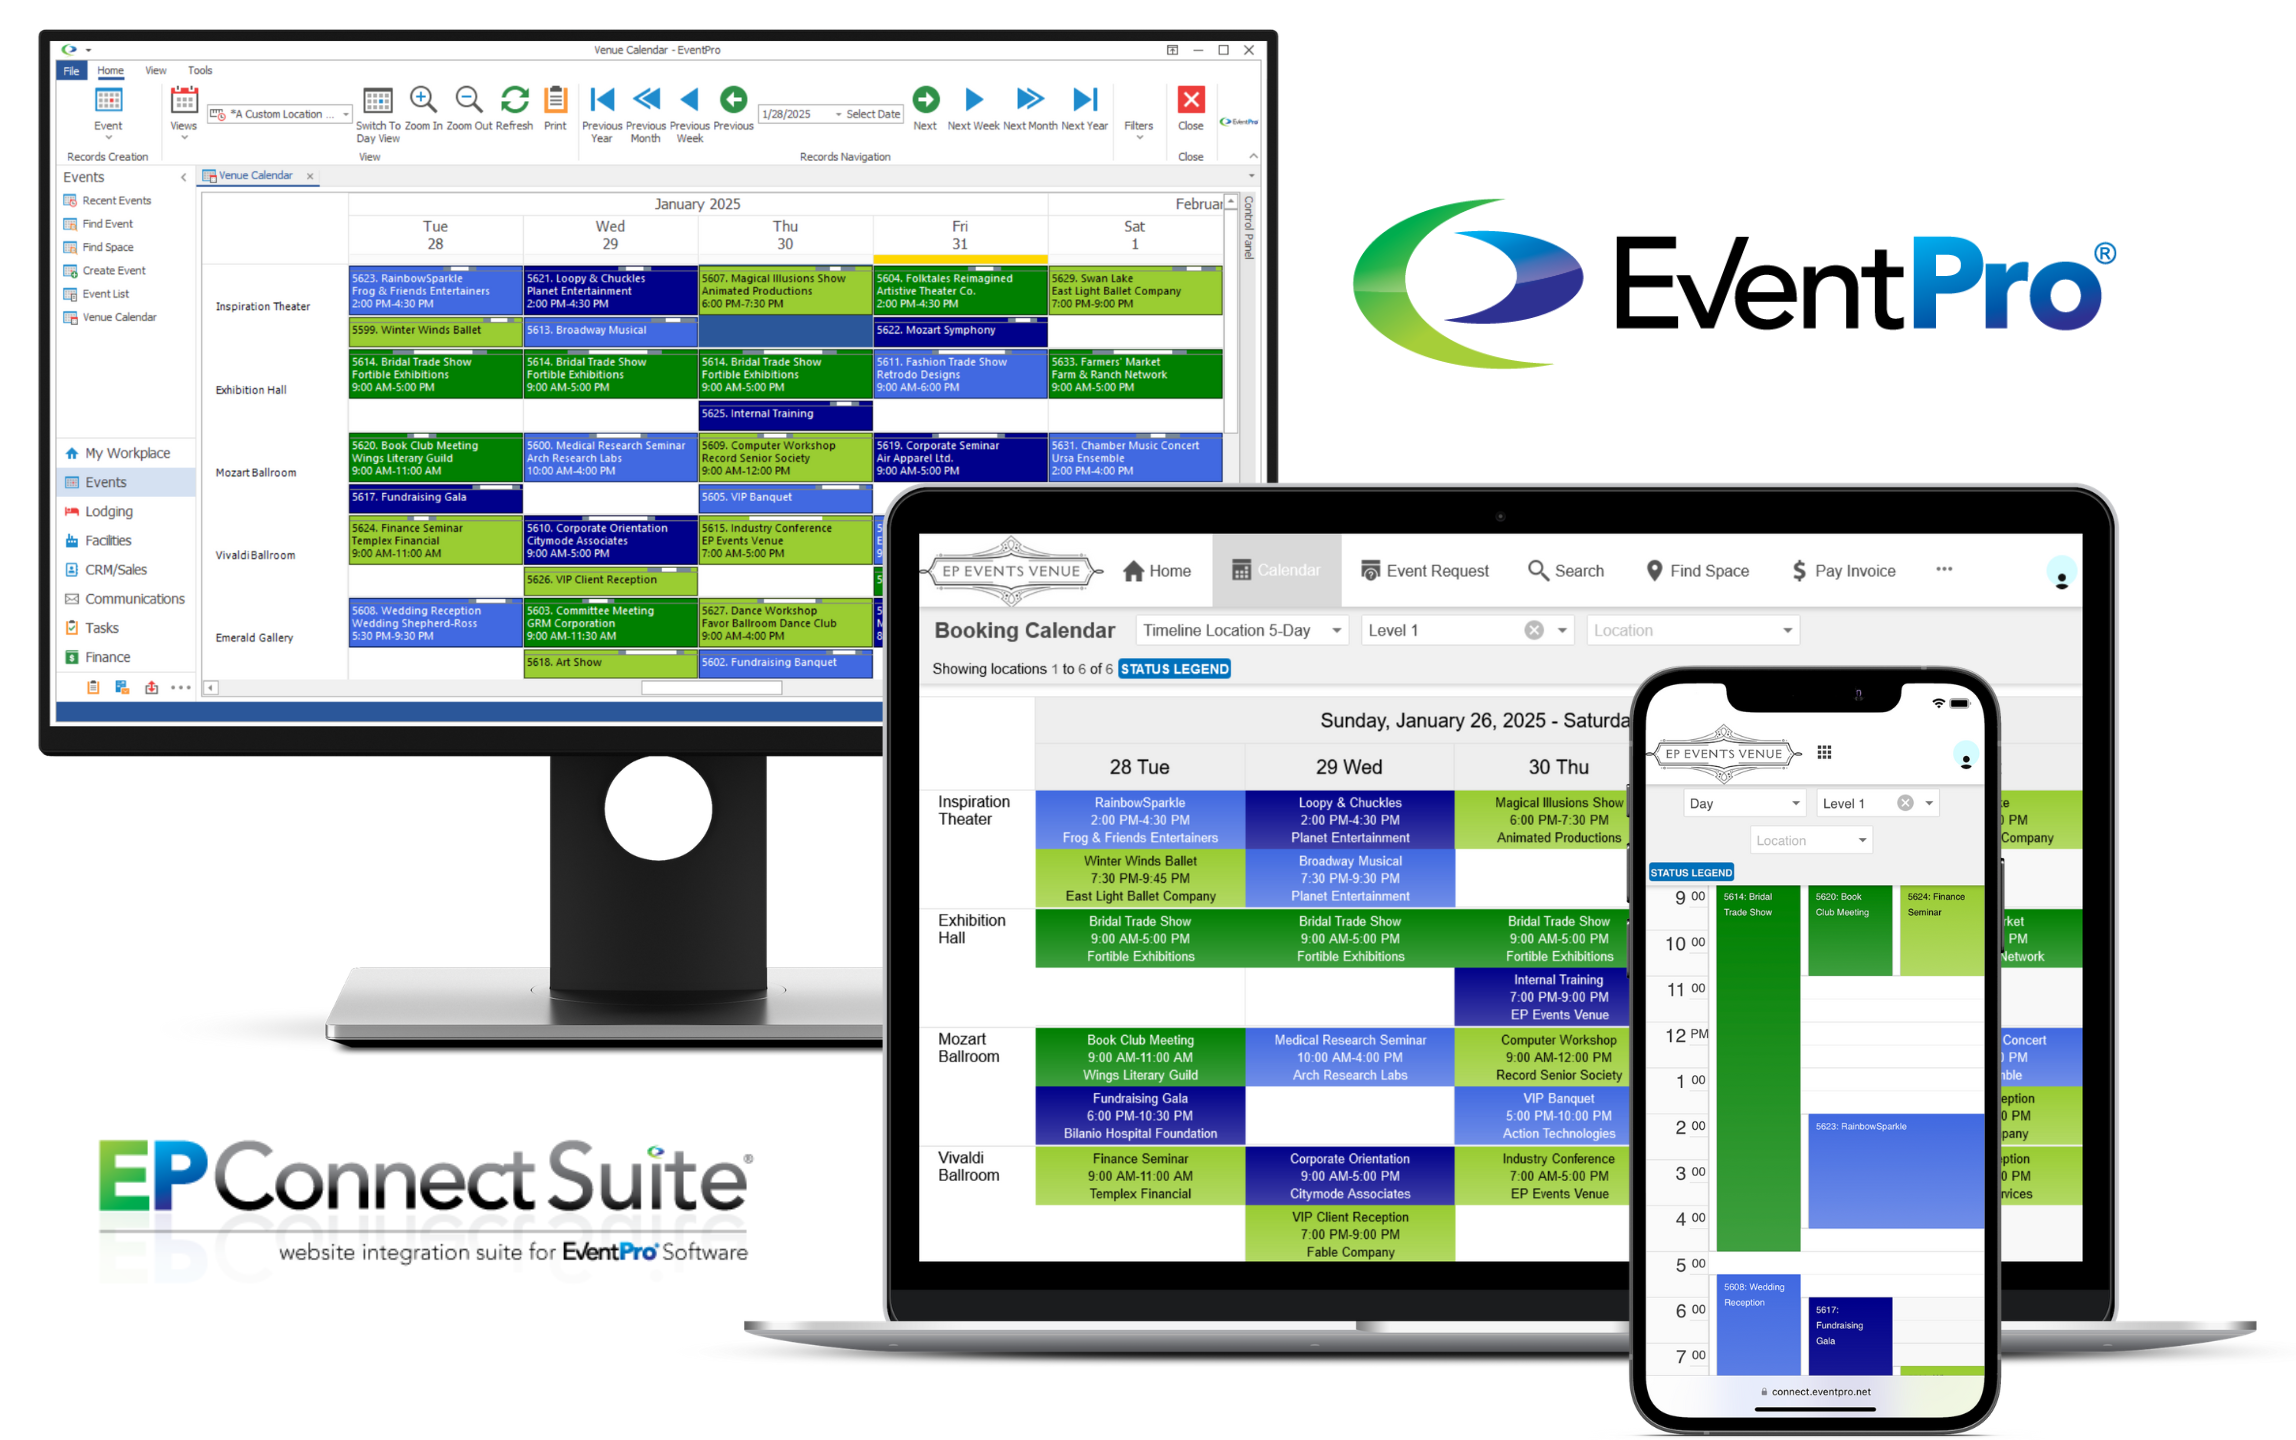 EPConnect Suite (web integration): Connects to your EventPro database for convenient, real-time online access to key components of your choice - event calendar, bookings, inquiries, attendee registrations, exhibitor booth reservations, payments, and more.